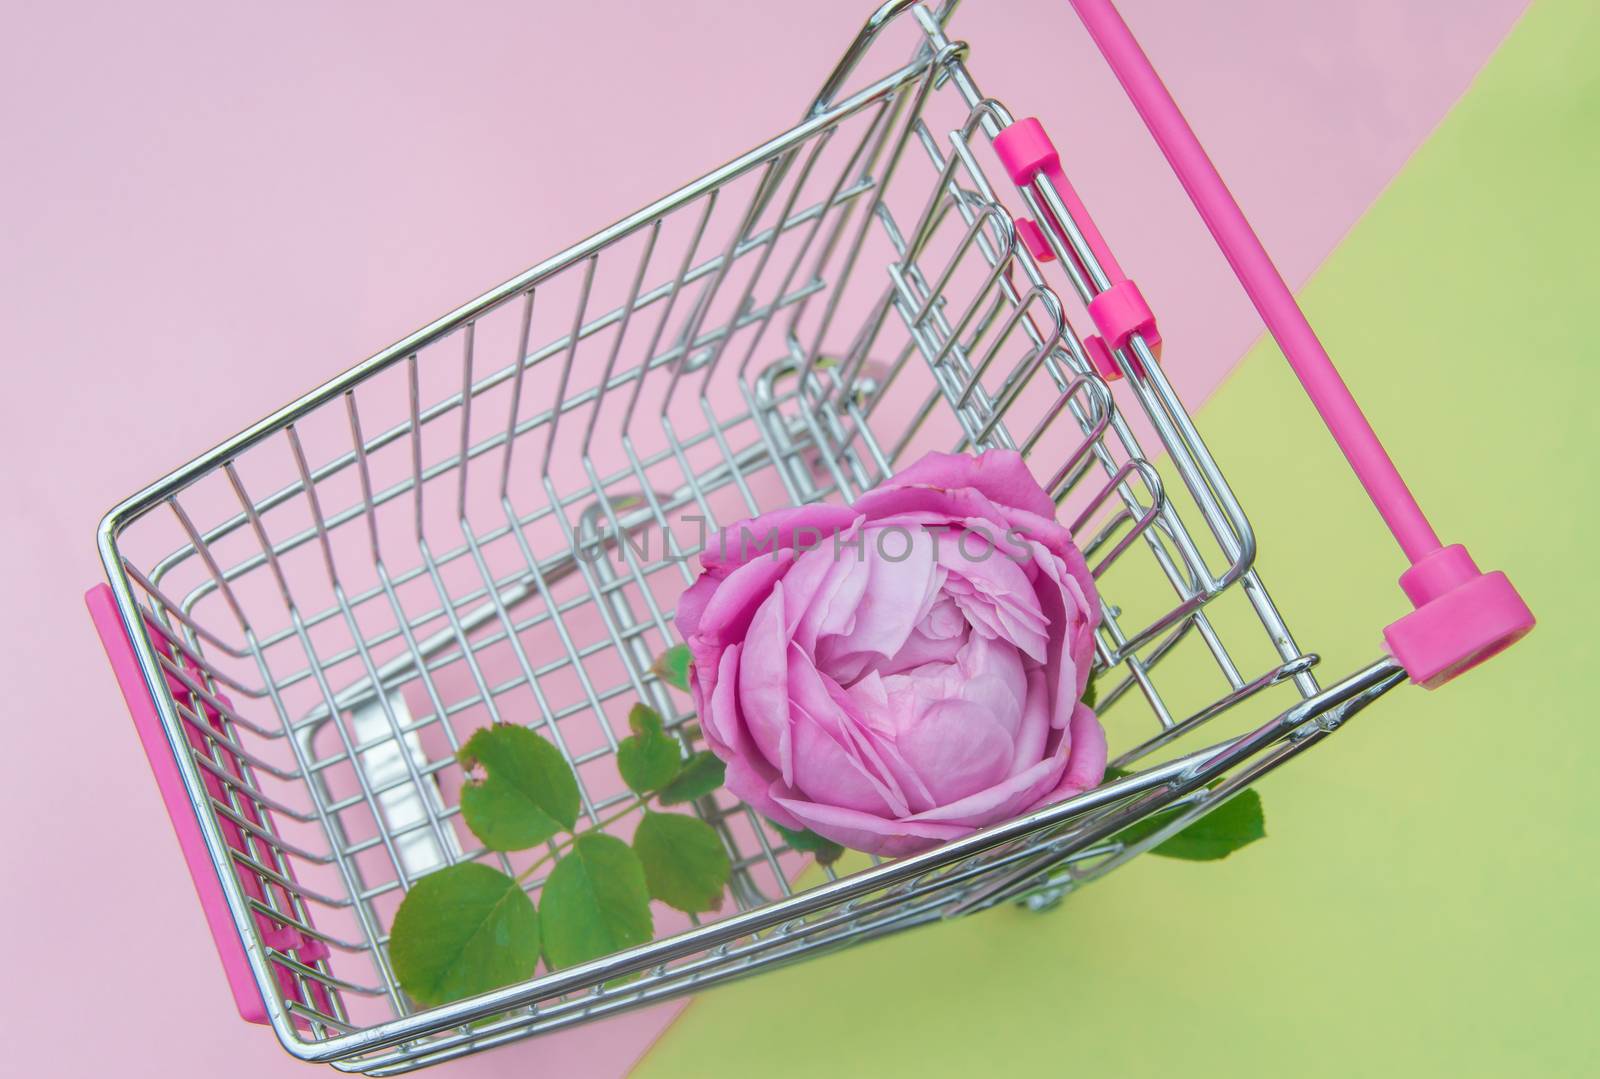 One beautiful pink rose on a shopping cart by claire_lucia